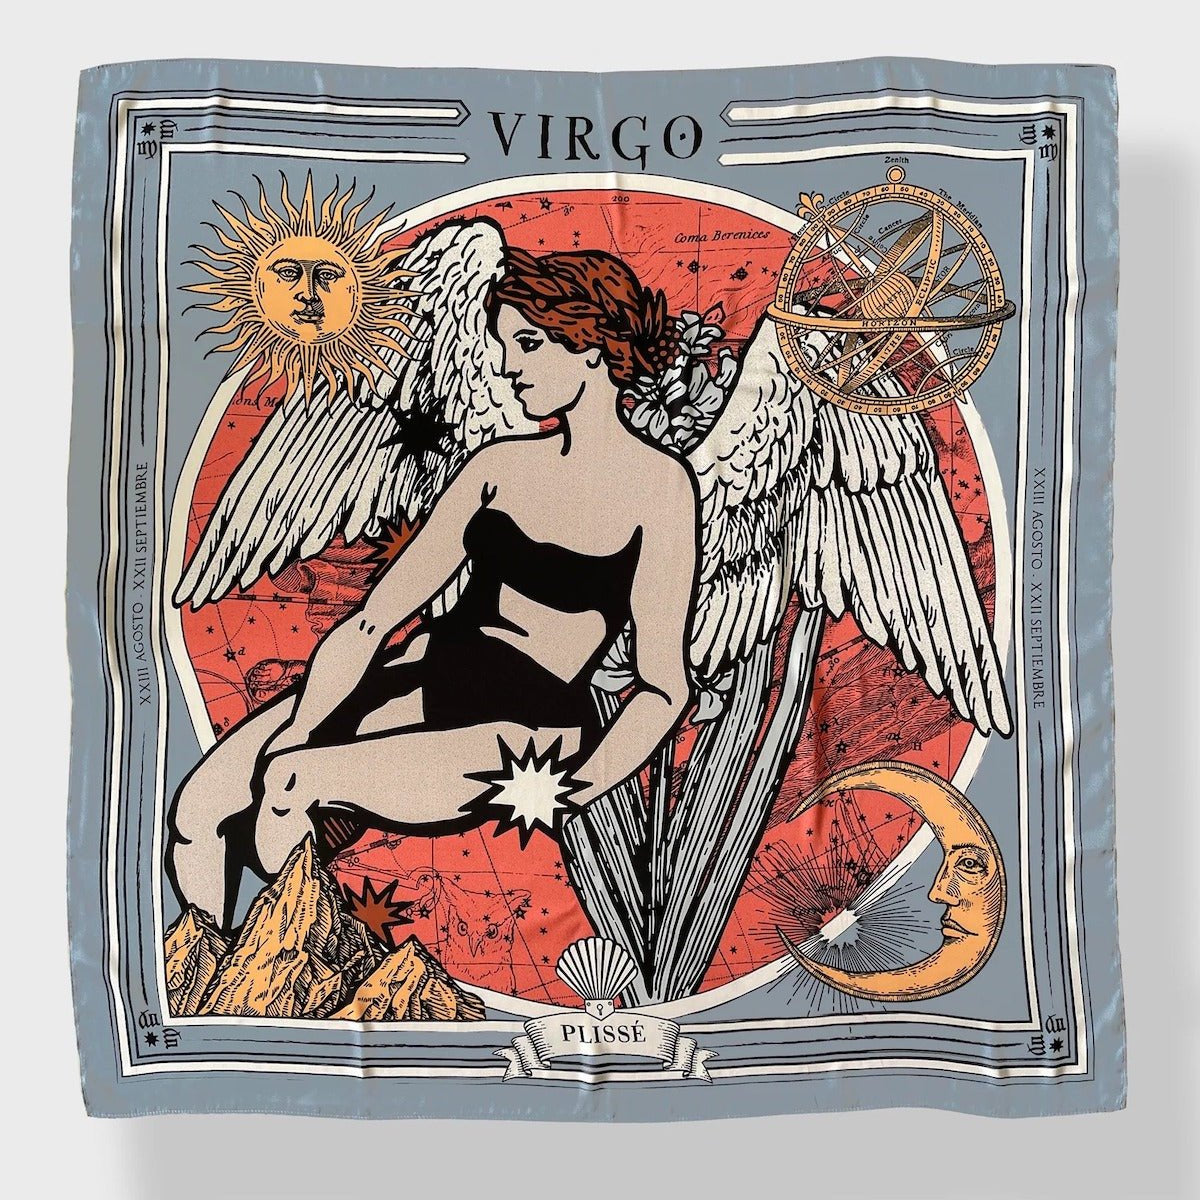 Zodiac Scarf for Virgo made by Plissé. Image of maiden with angel wings. She is on top of a red astrological background. Details of an ecliptic, sun, moon, and mountain range. The scarf is a soft greyish blue color displayed on top of a plain white background.